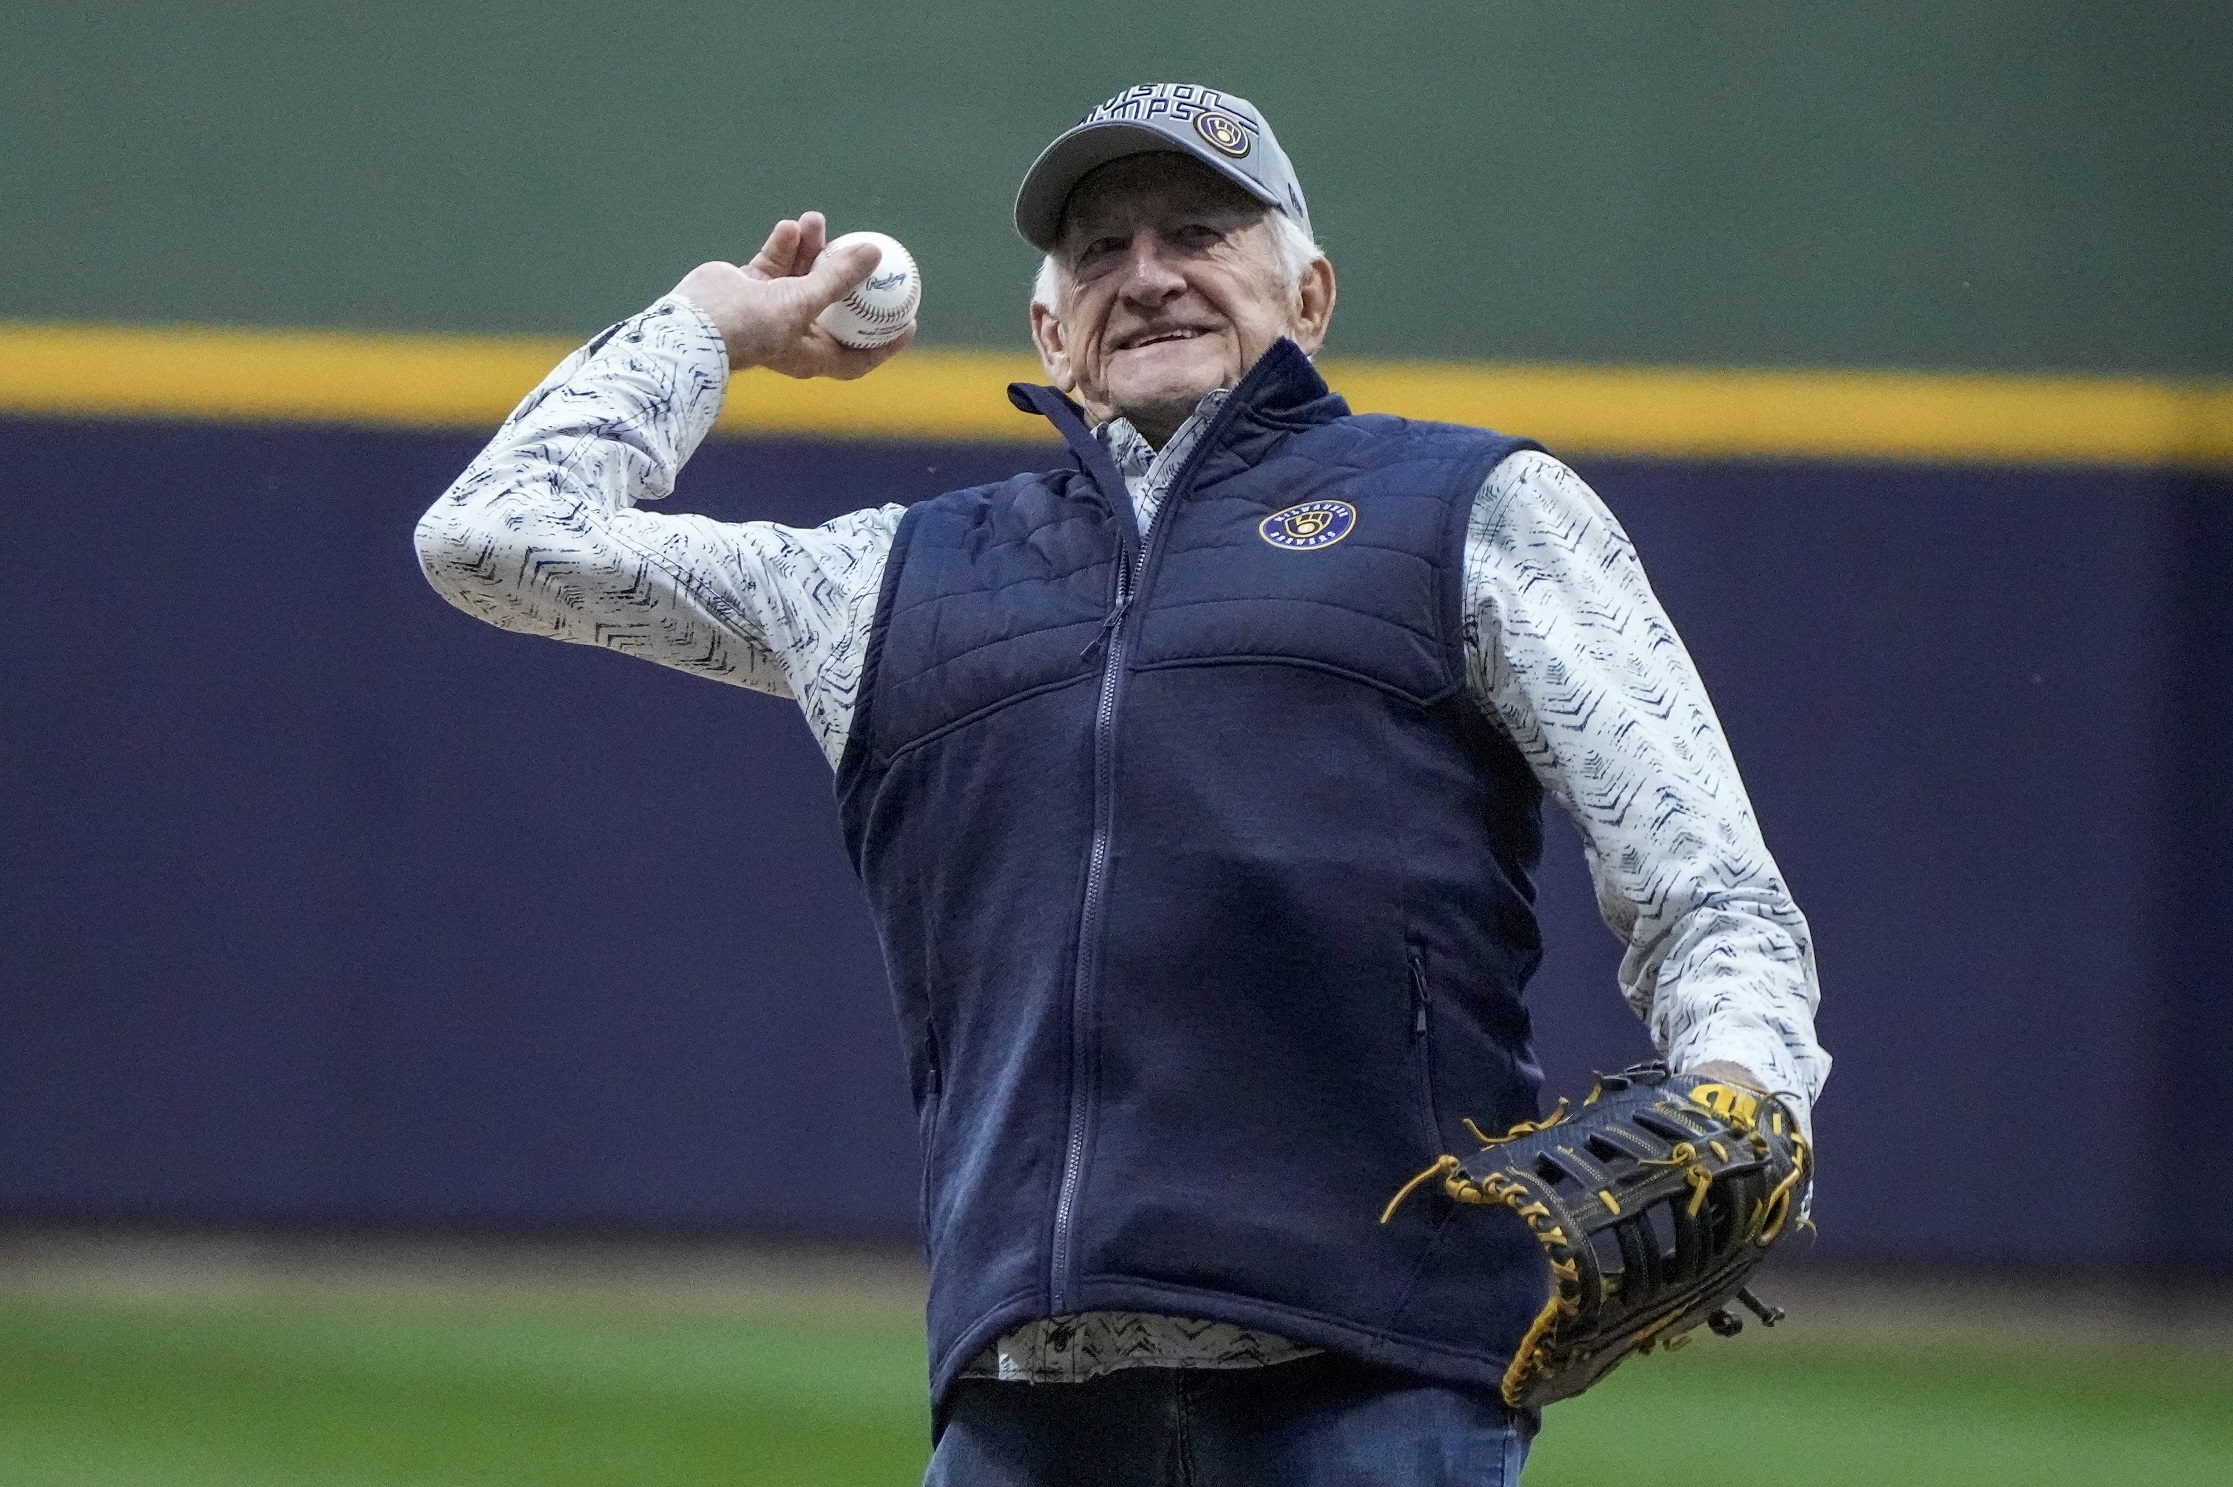 Bob Uecker after Brewers loss, “We will be back next season, once again.”